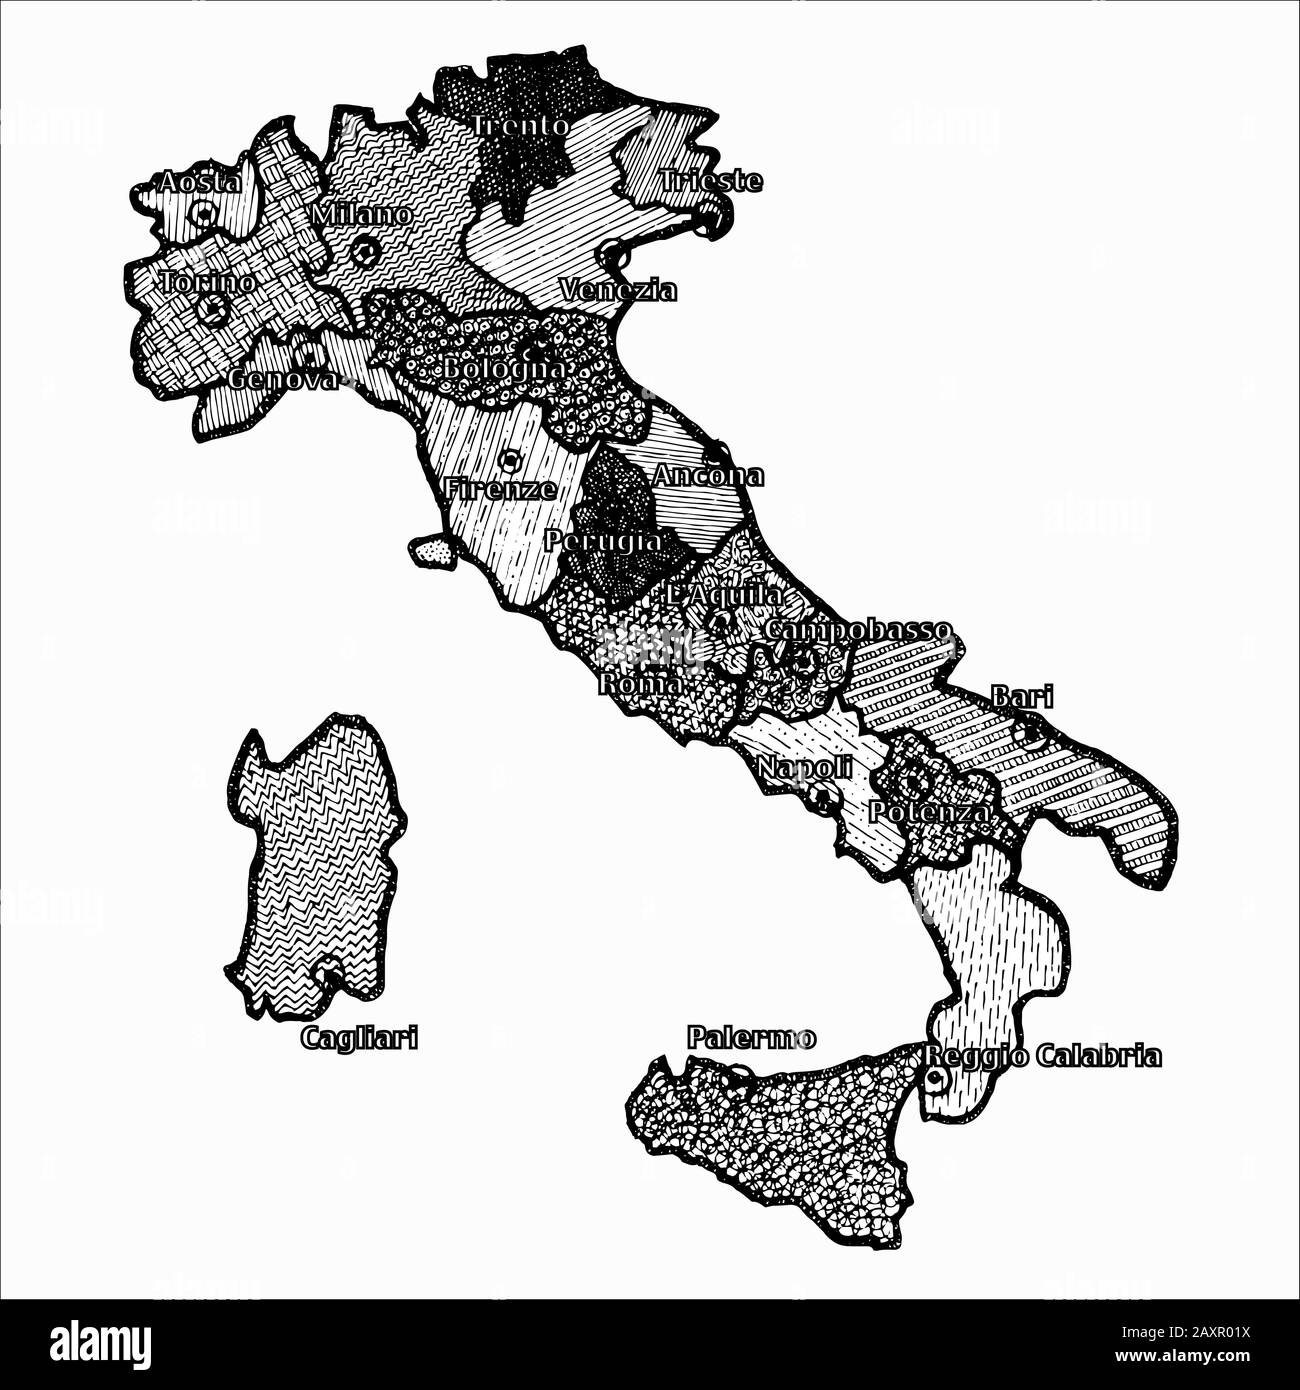 Map of Italy bright graphic illustration. Handmade drawing with map. Italy map with Italian major cities and regions. Bright illustration Stock Photo